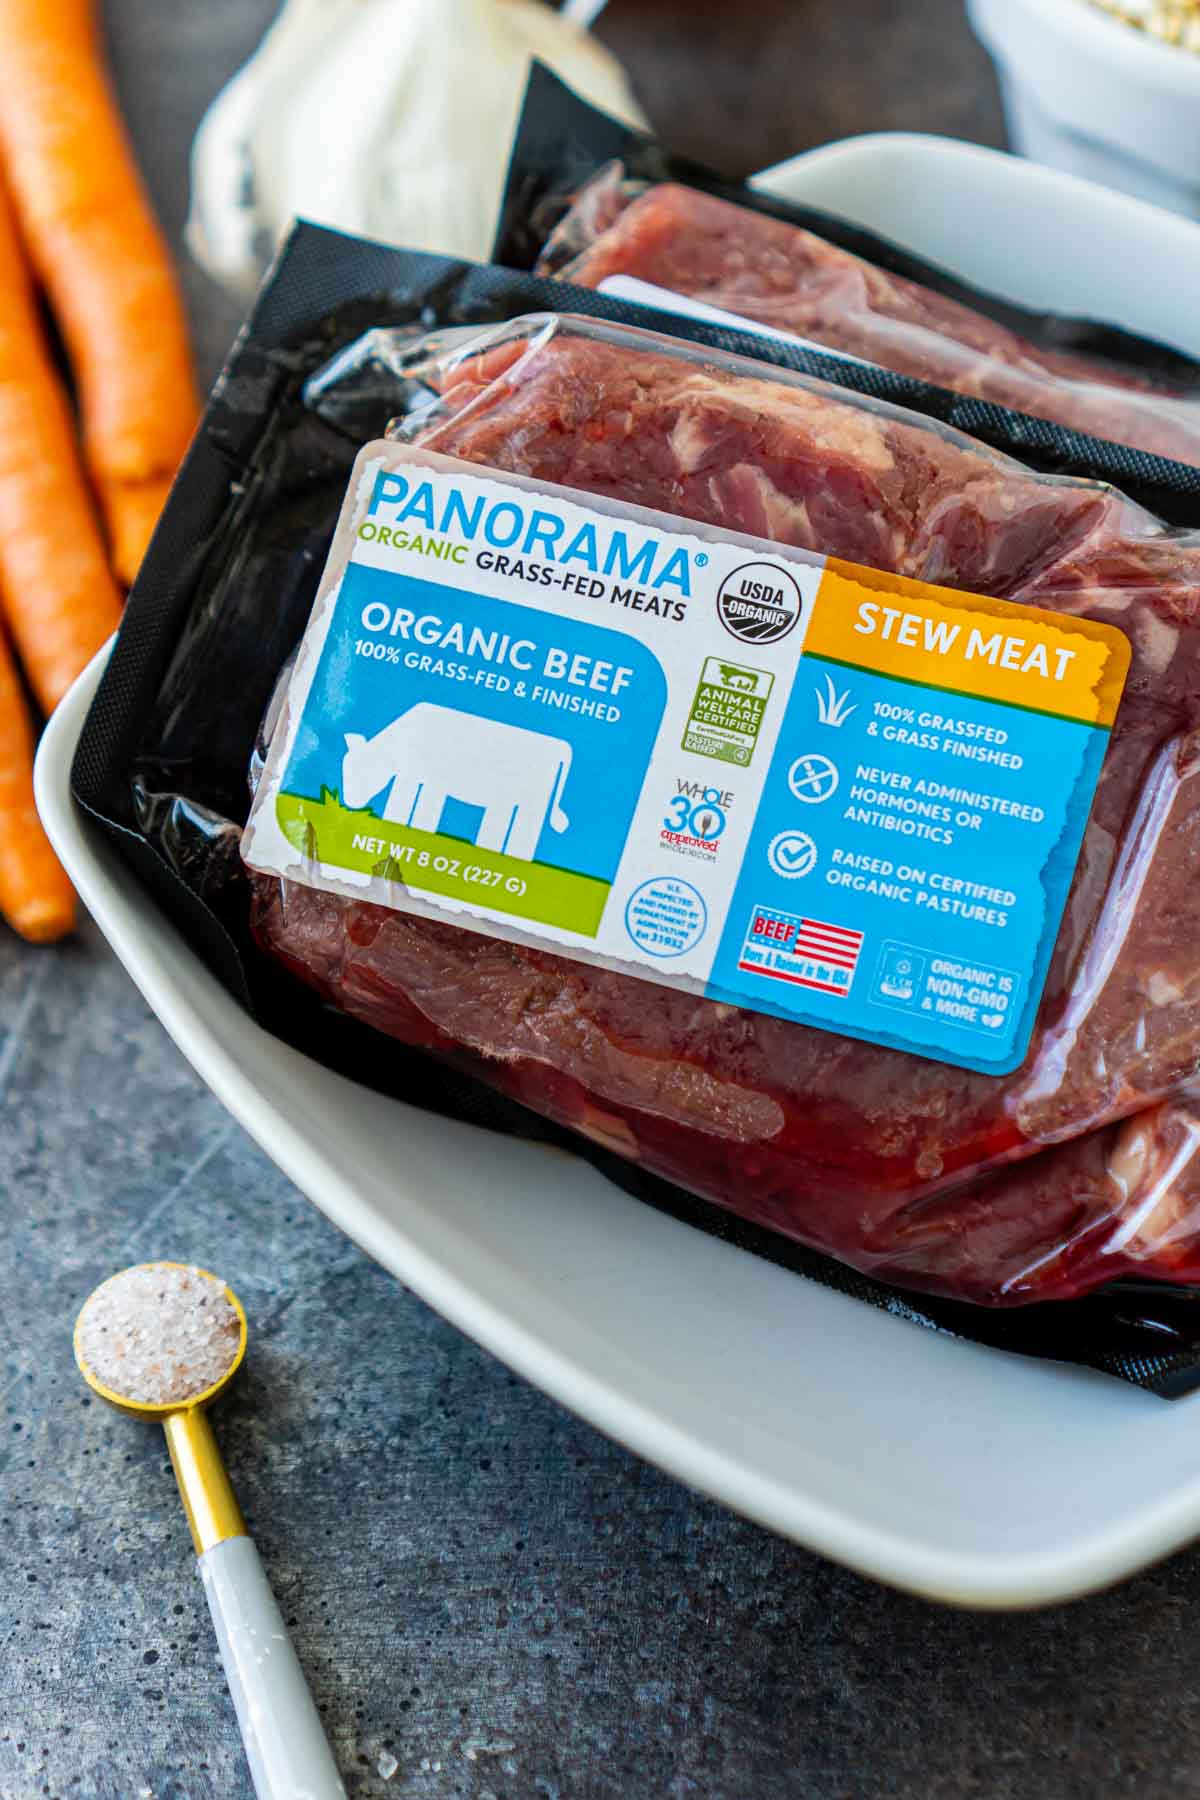 Package of Panorama grass-fed beef stew meat